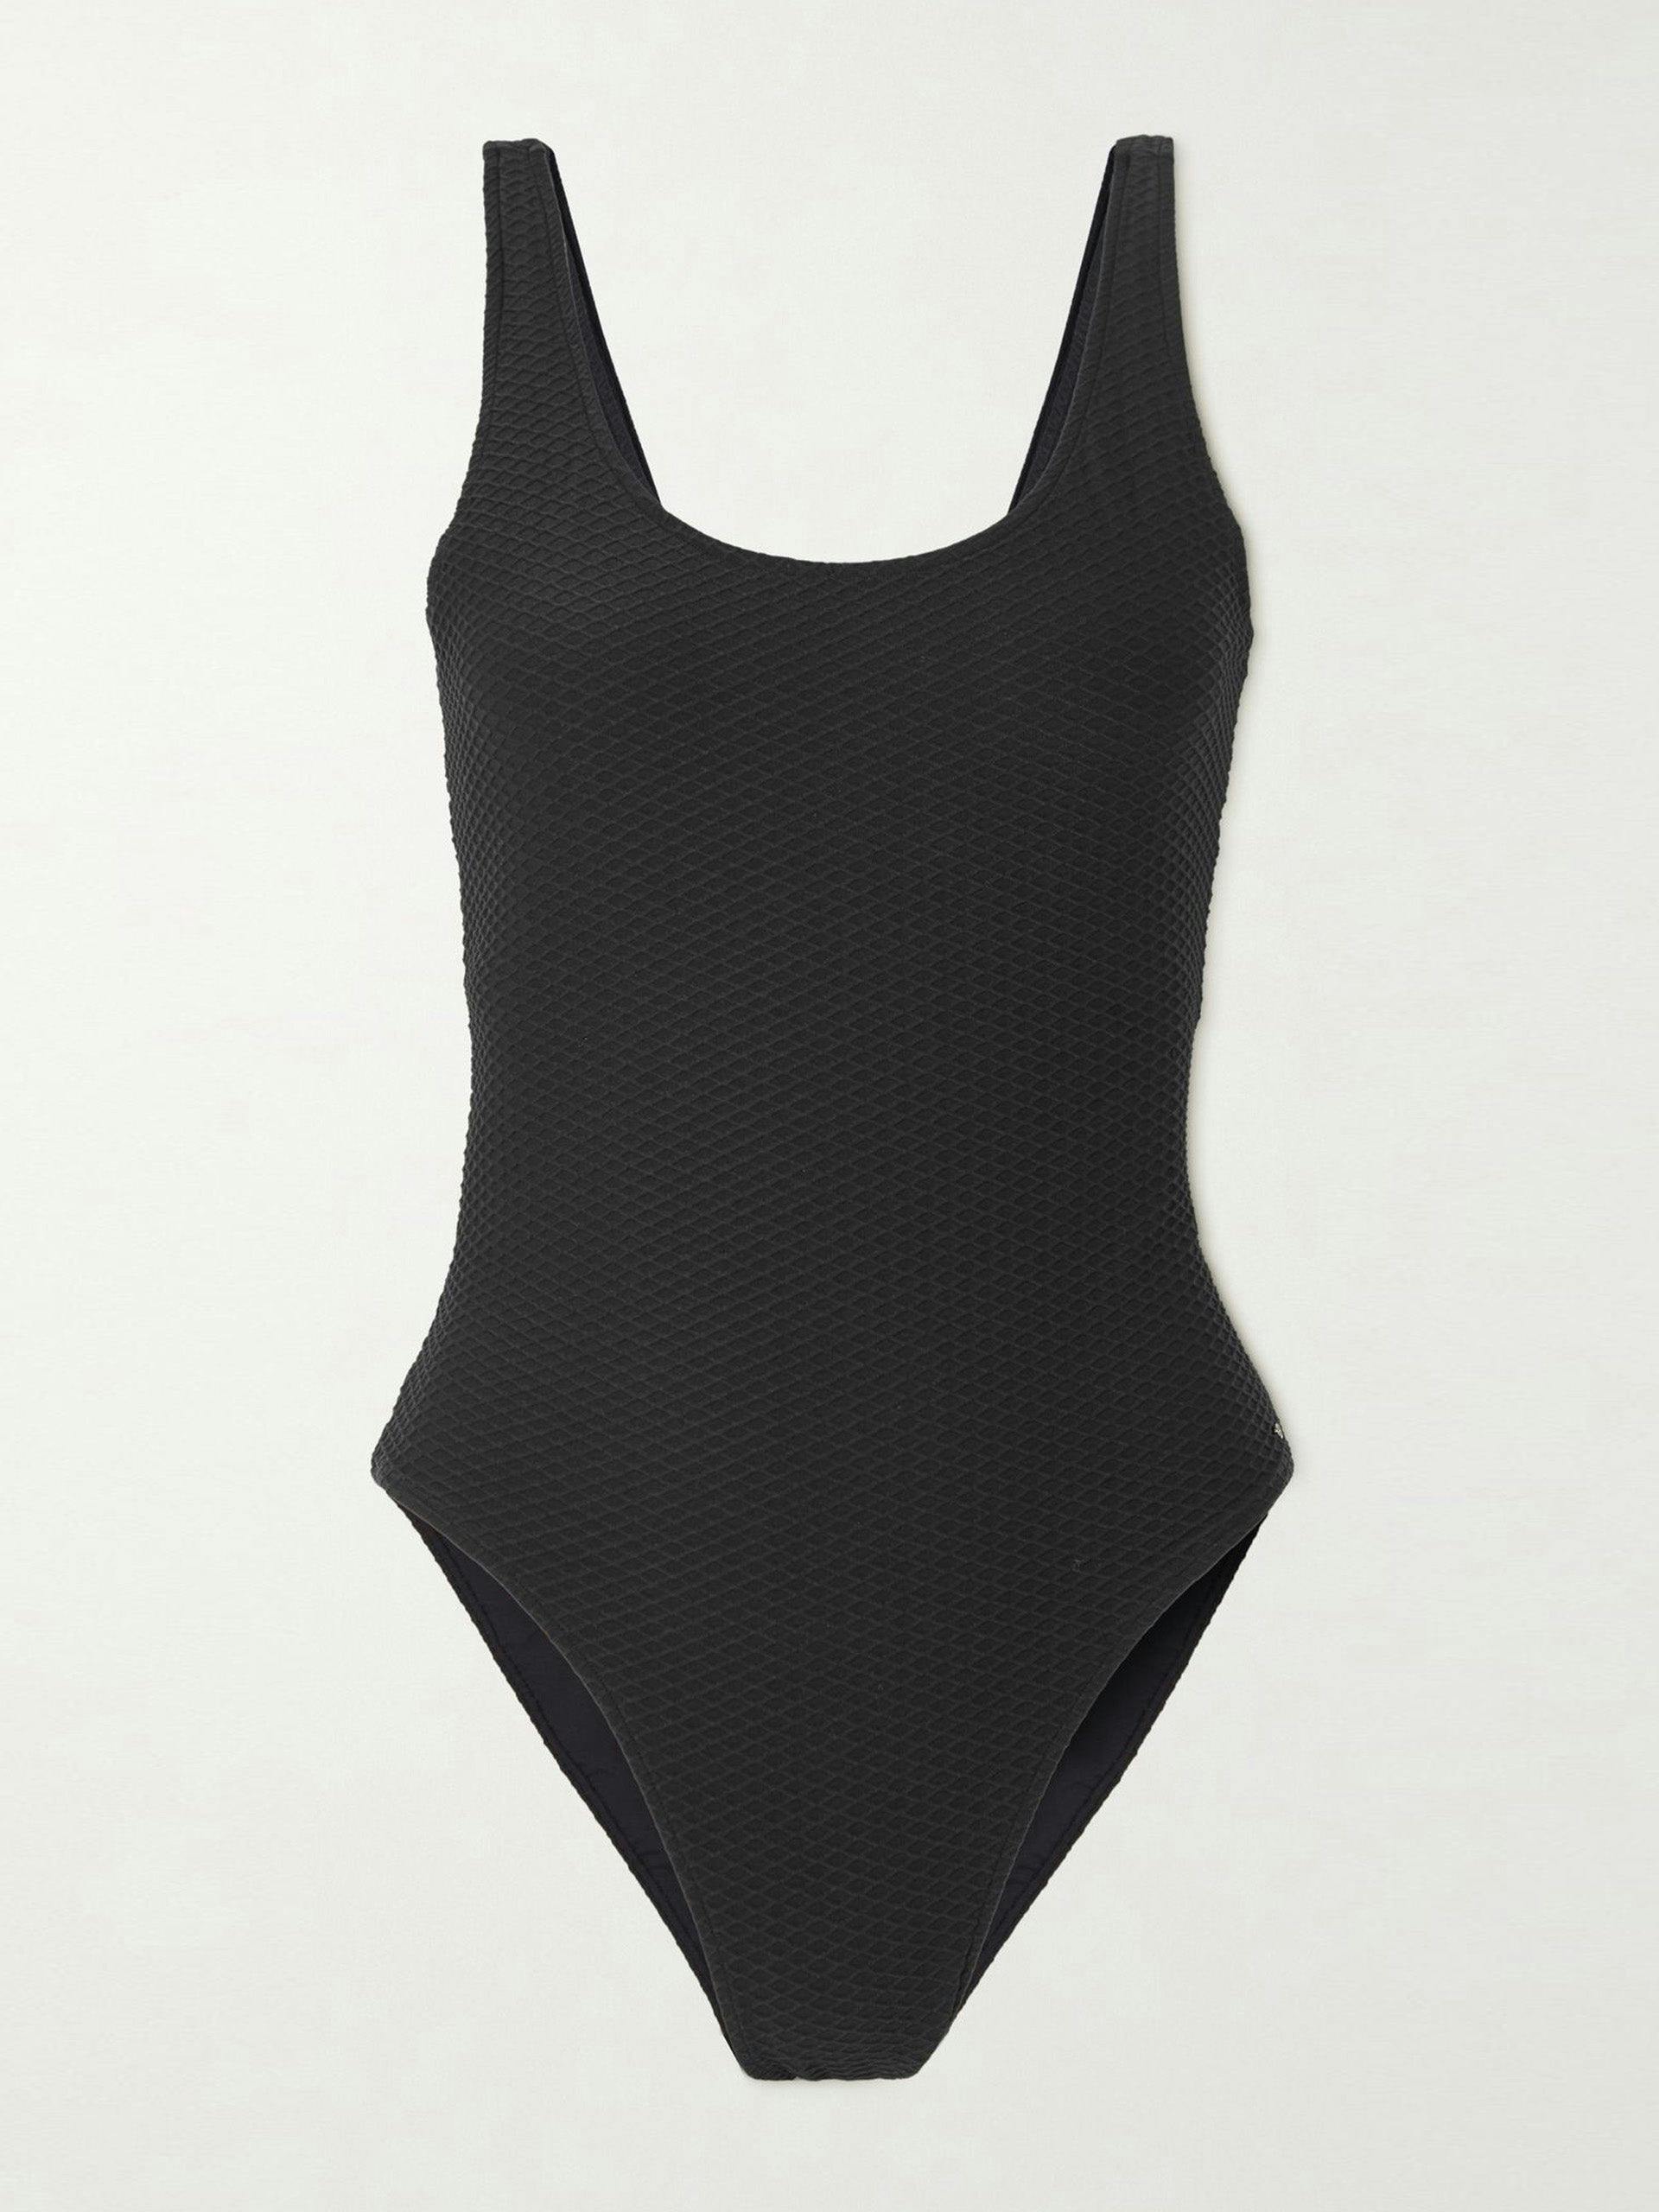 Black textured recycled swimsuit